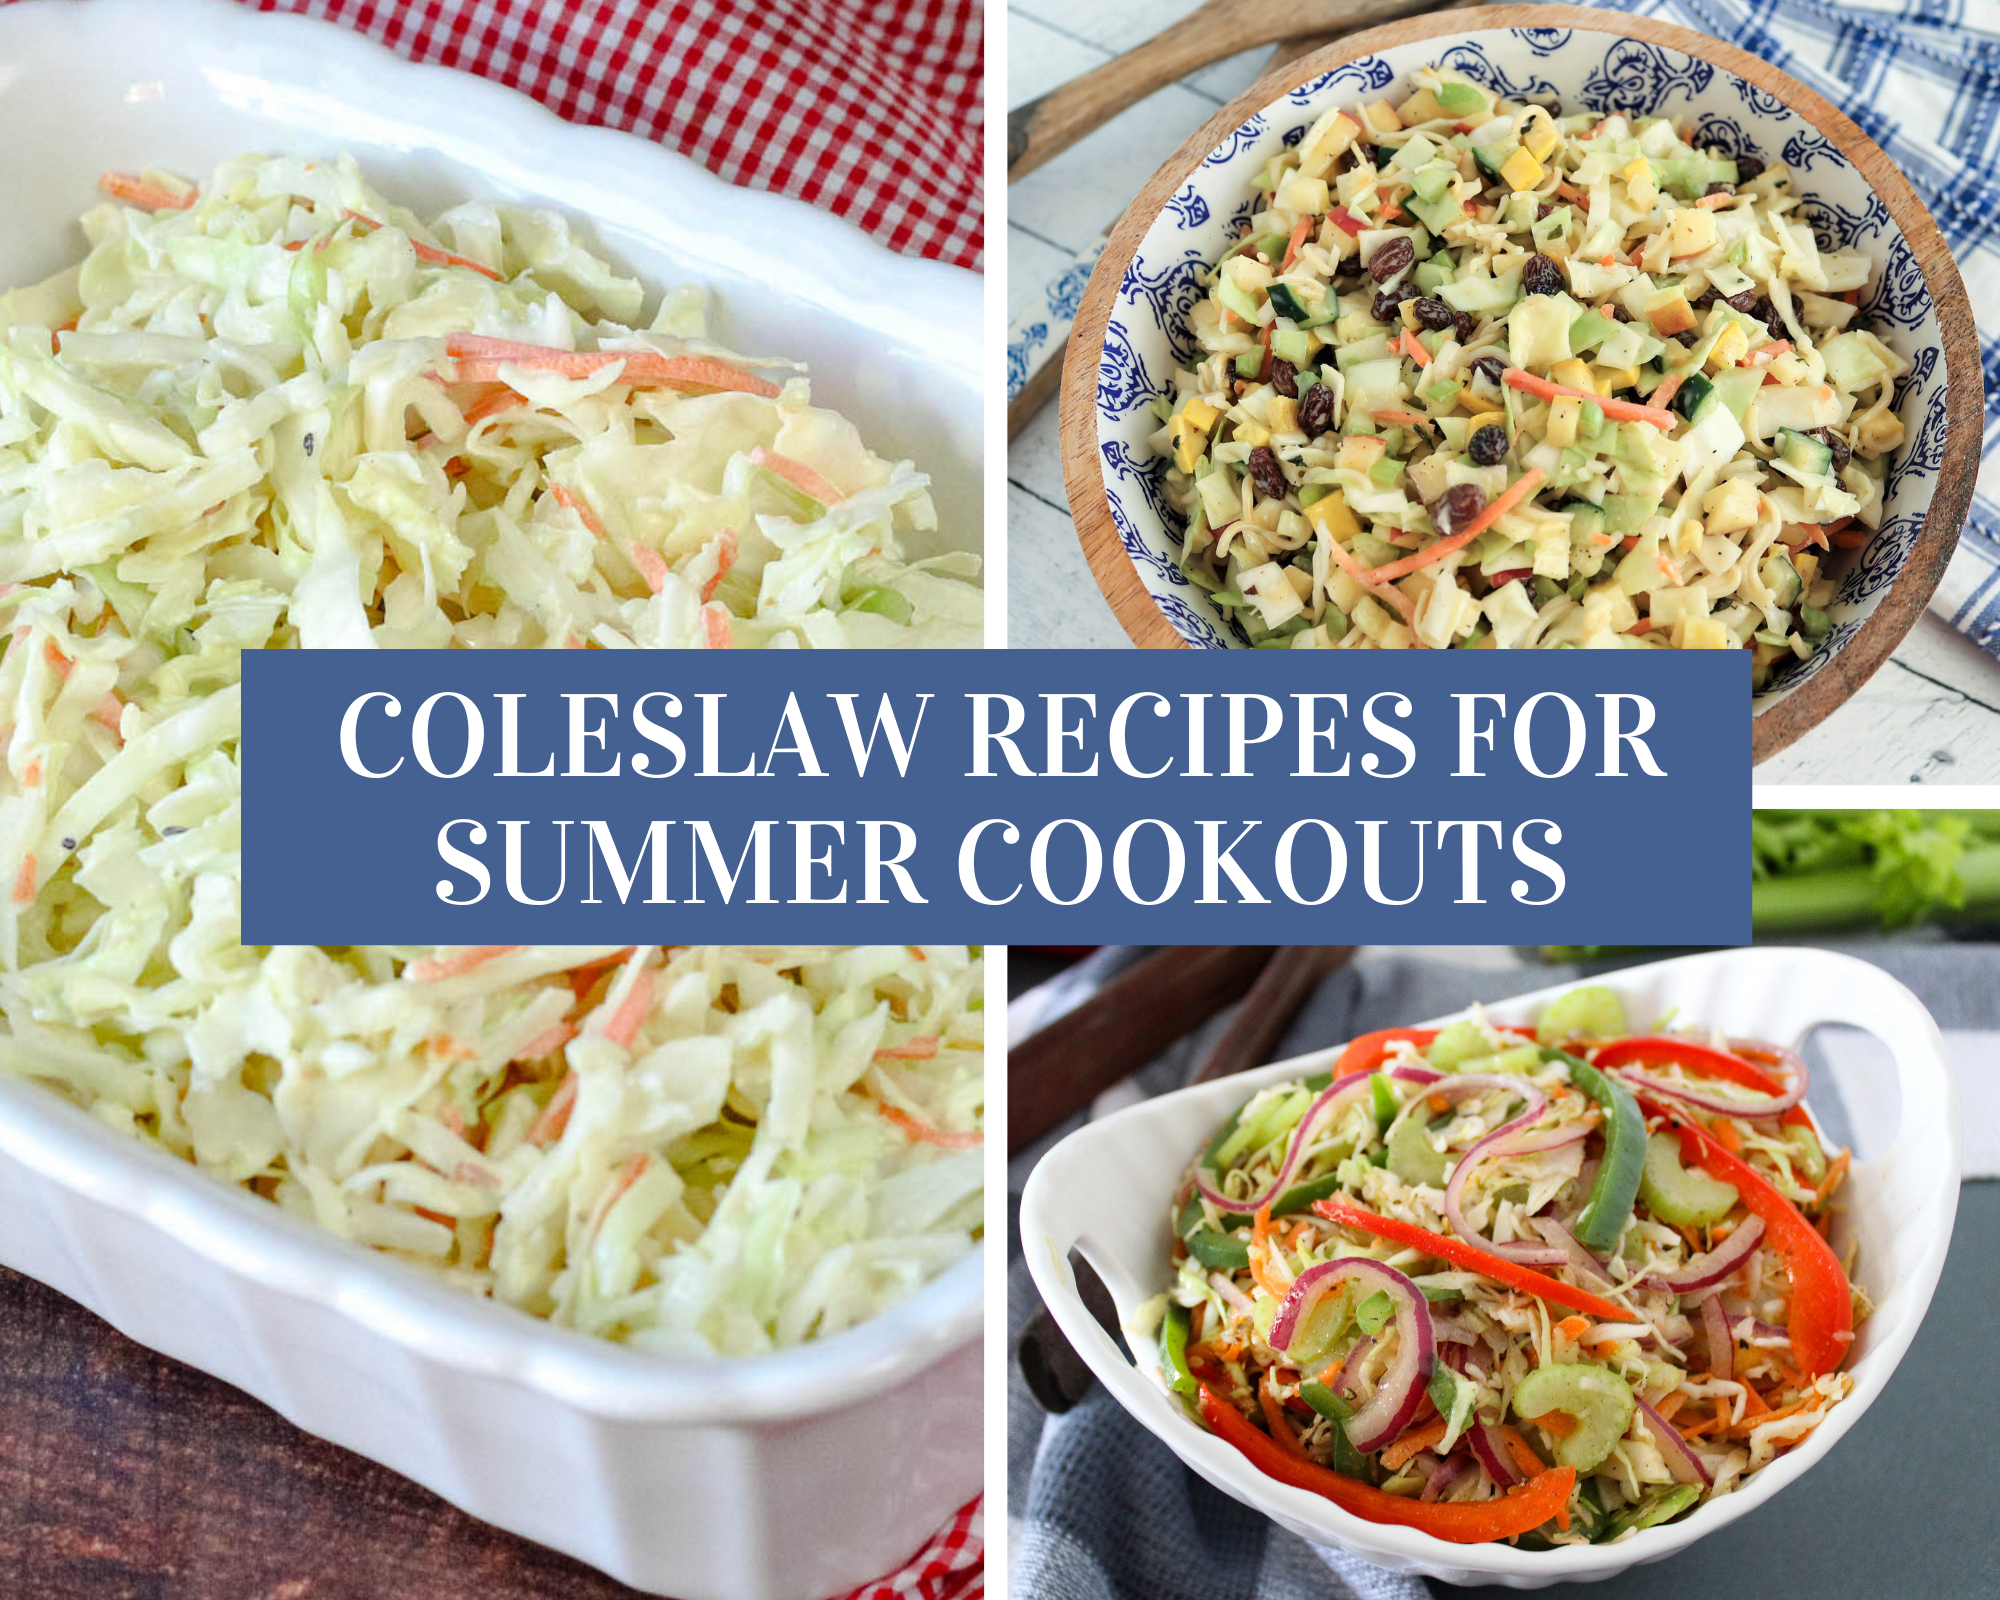 Coleslaw Recipes for Summer Cookouts